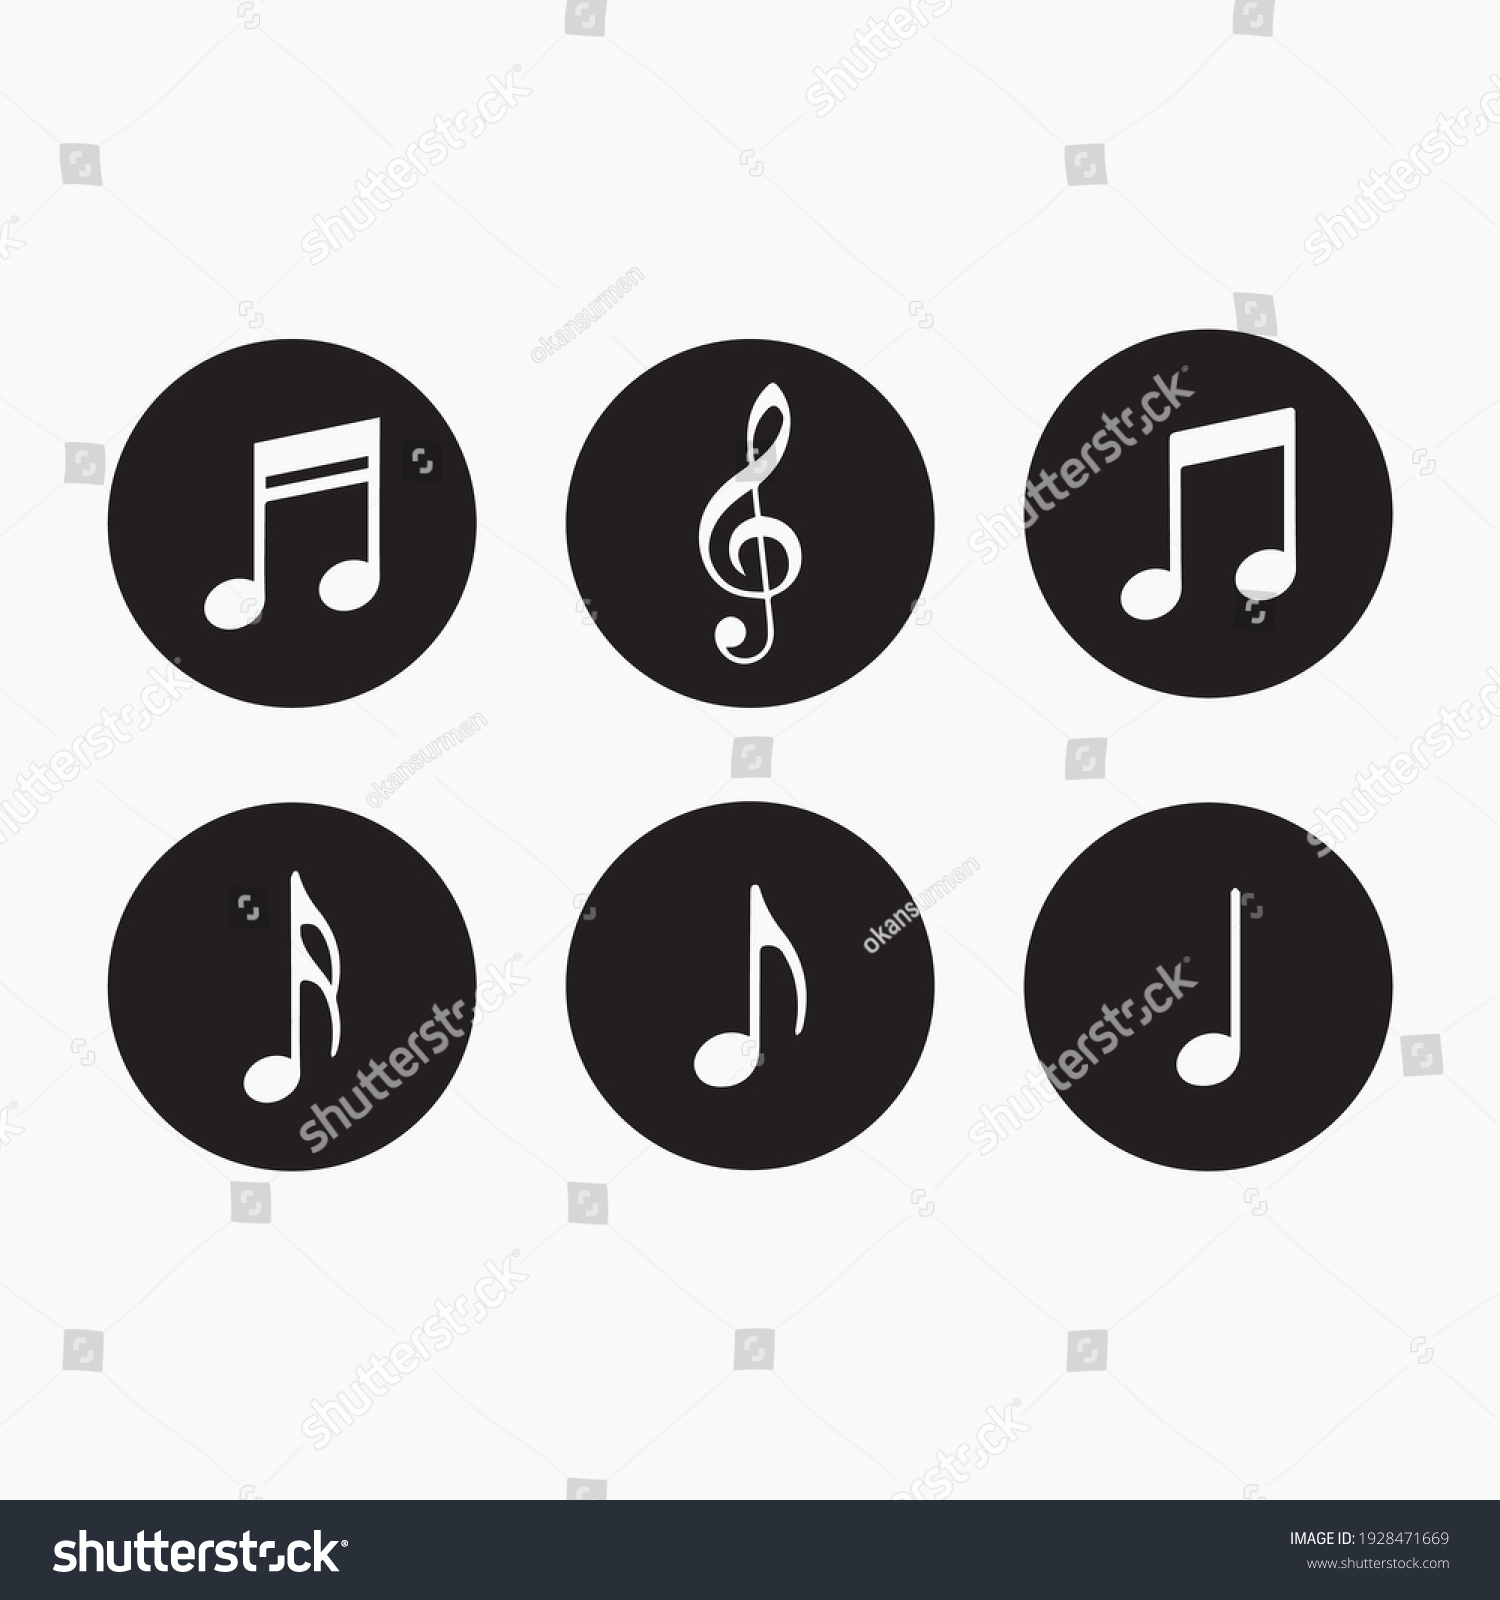 music-notes-symbols-music-notes-icon-stock-vector-royalty-free